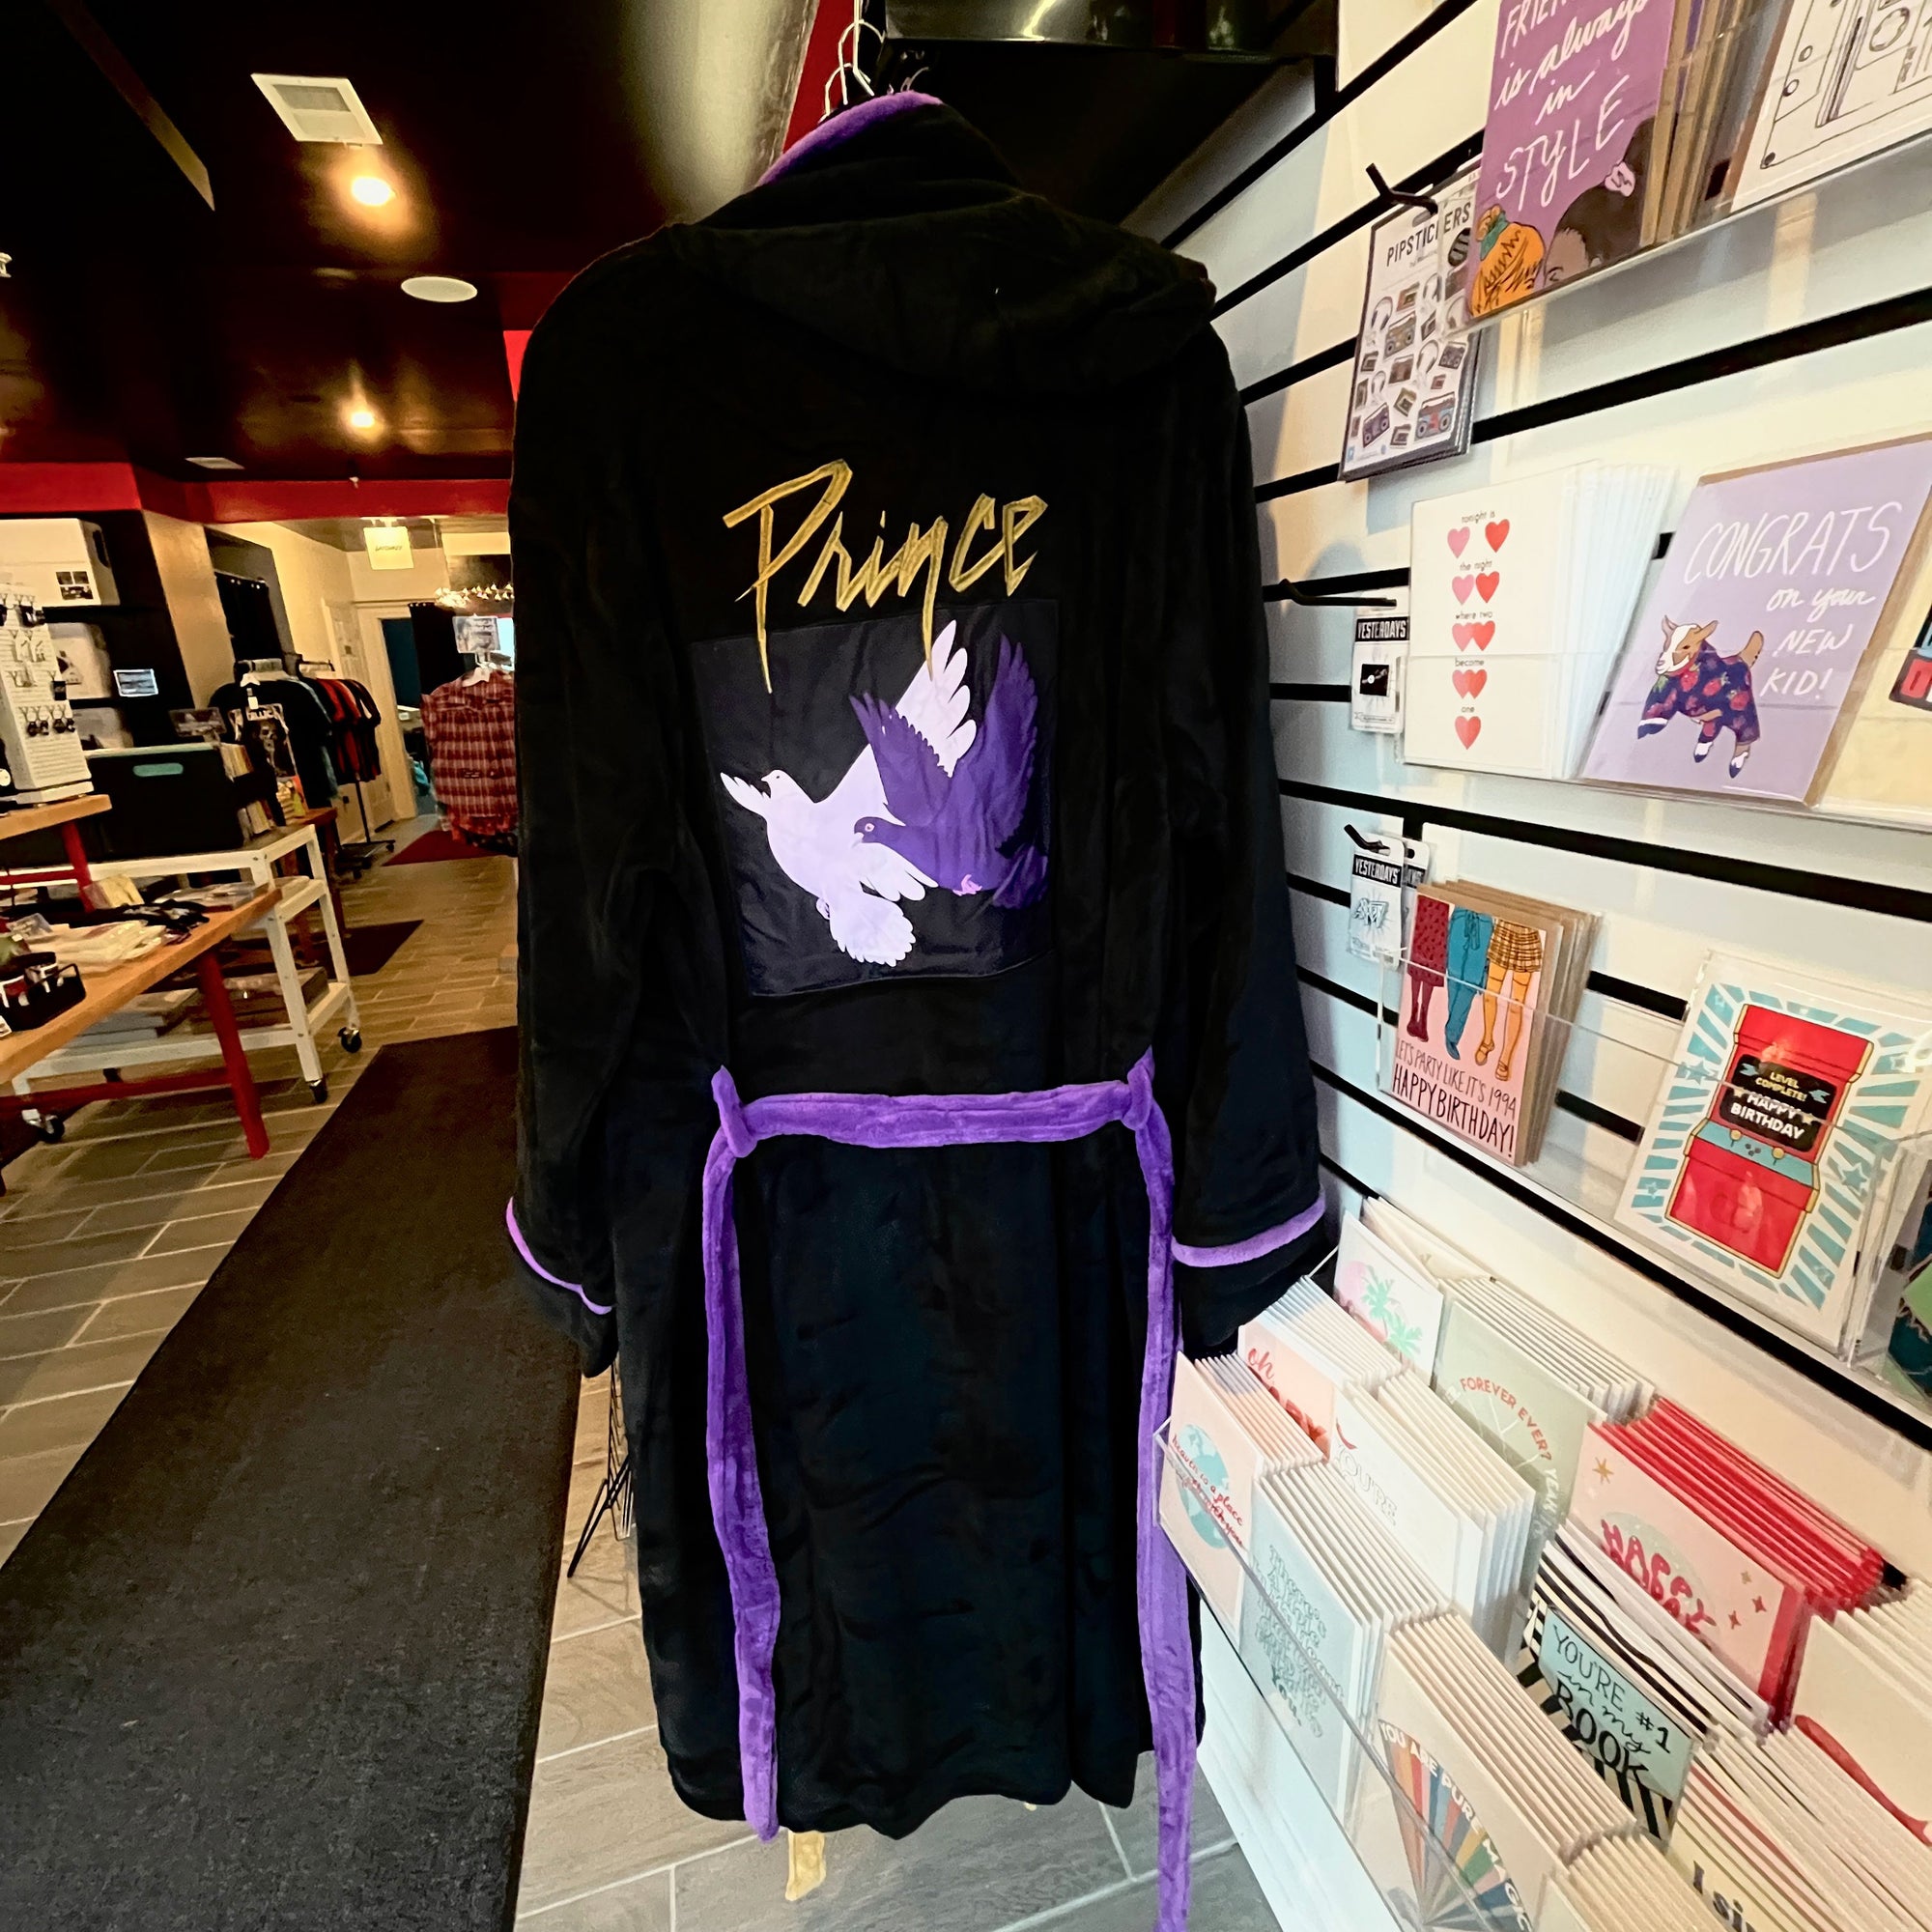 Prince "When Doves Cry" Black Robe